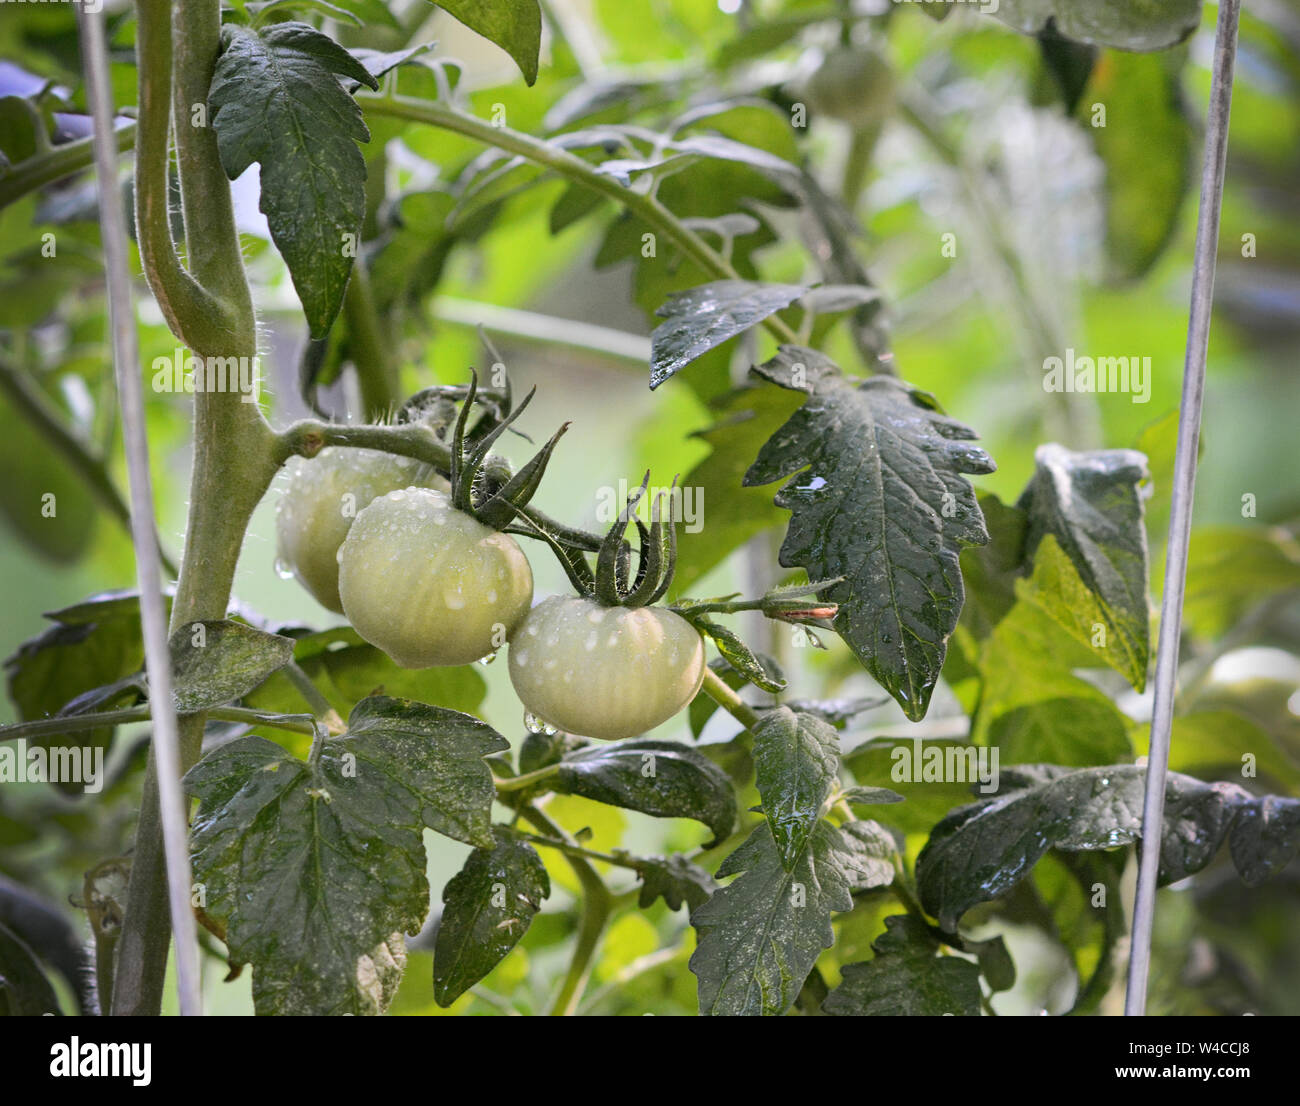 Closeup of green tomatoes growing on the vine. Garden. Healthy eating. Stock Photo